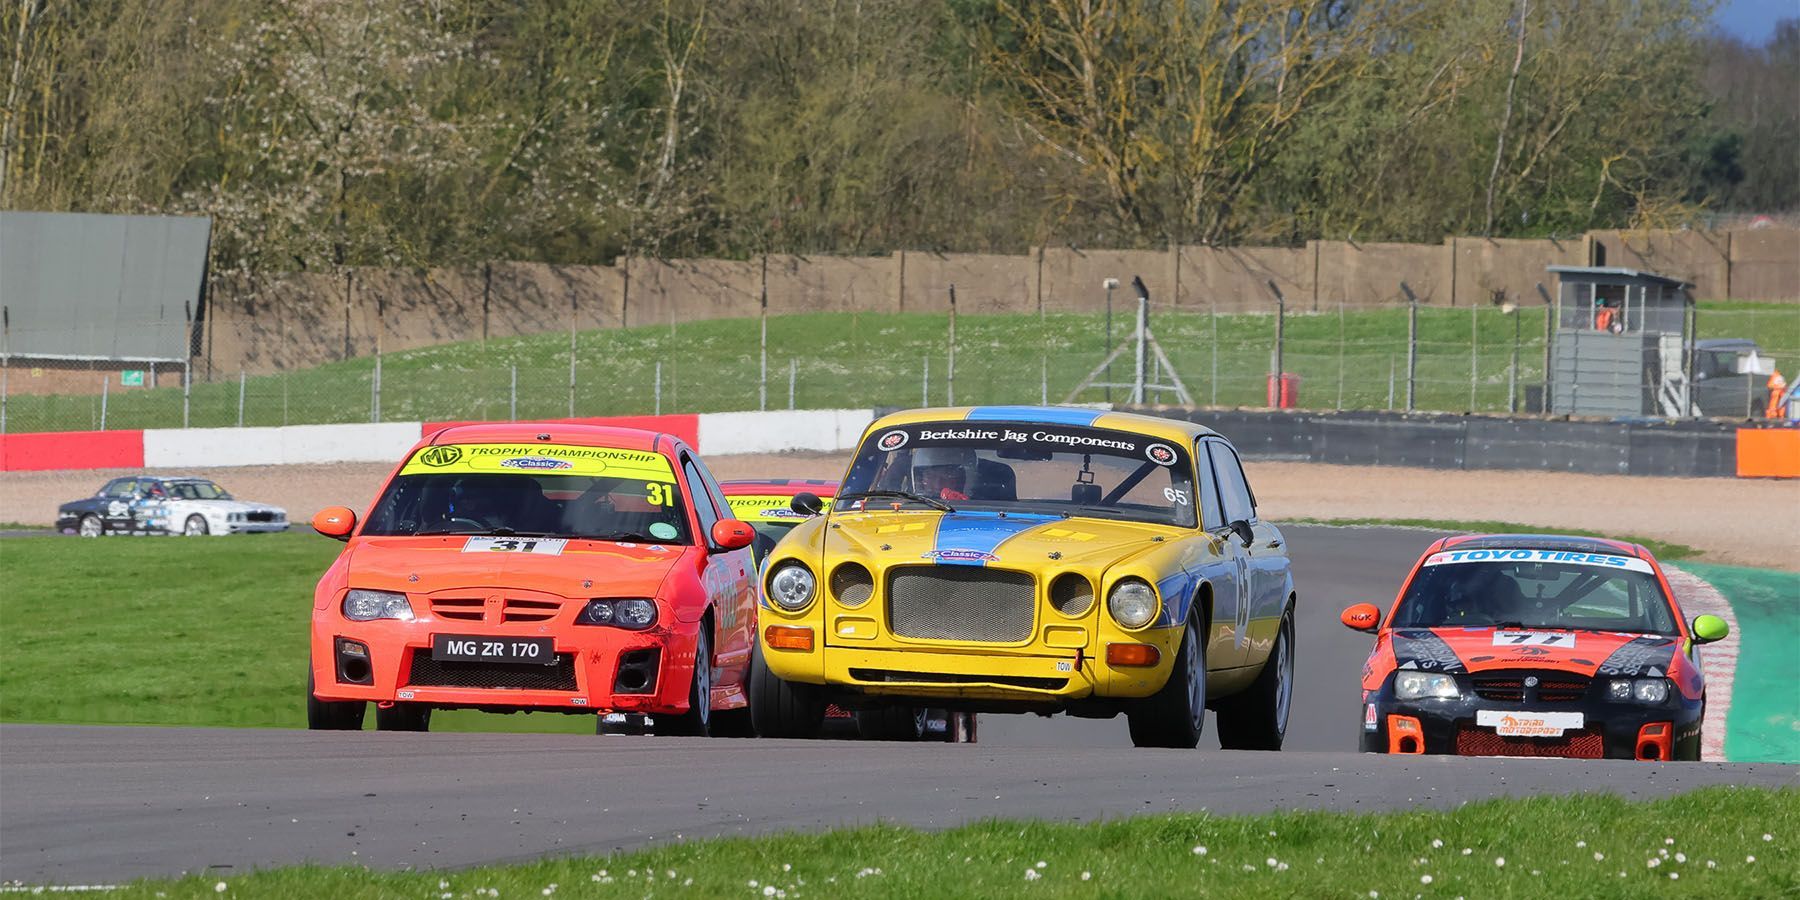 The Jaguar XJ6 4200 of Simon Lewis was no match for the MG ZRs.